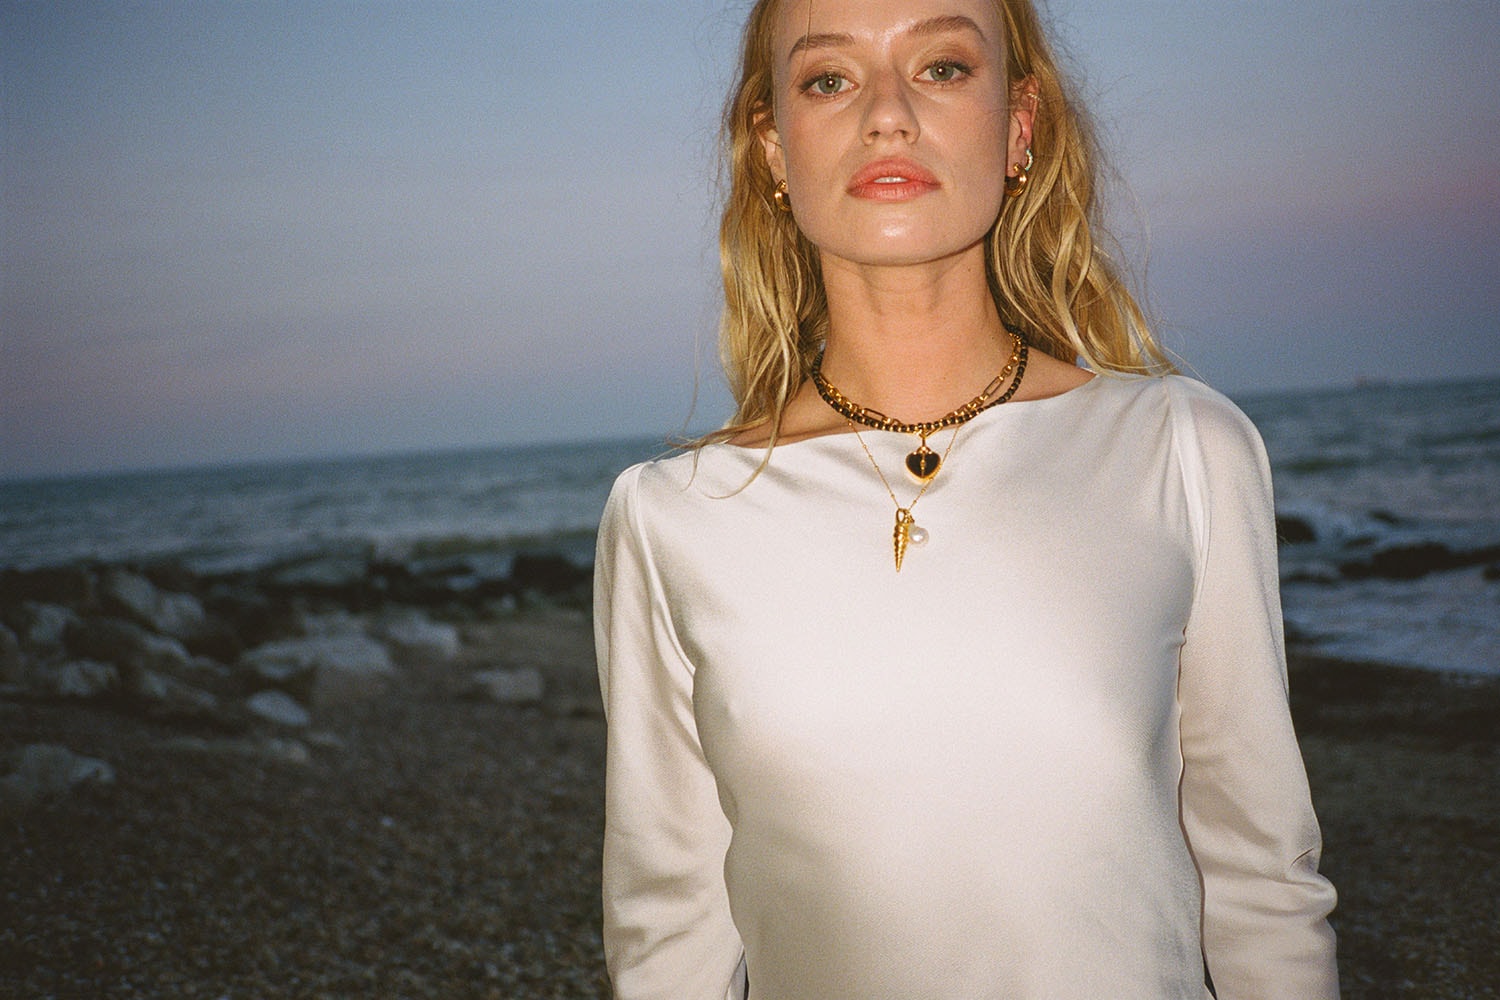 British Jeweler Missoma Launches First Pearls Collection Summer 2021